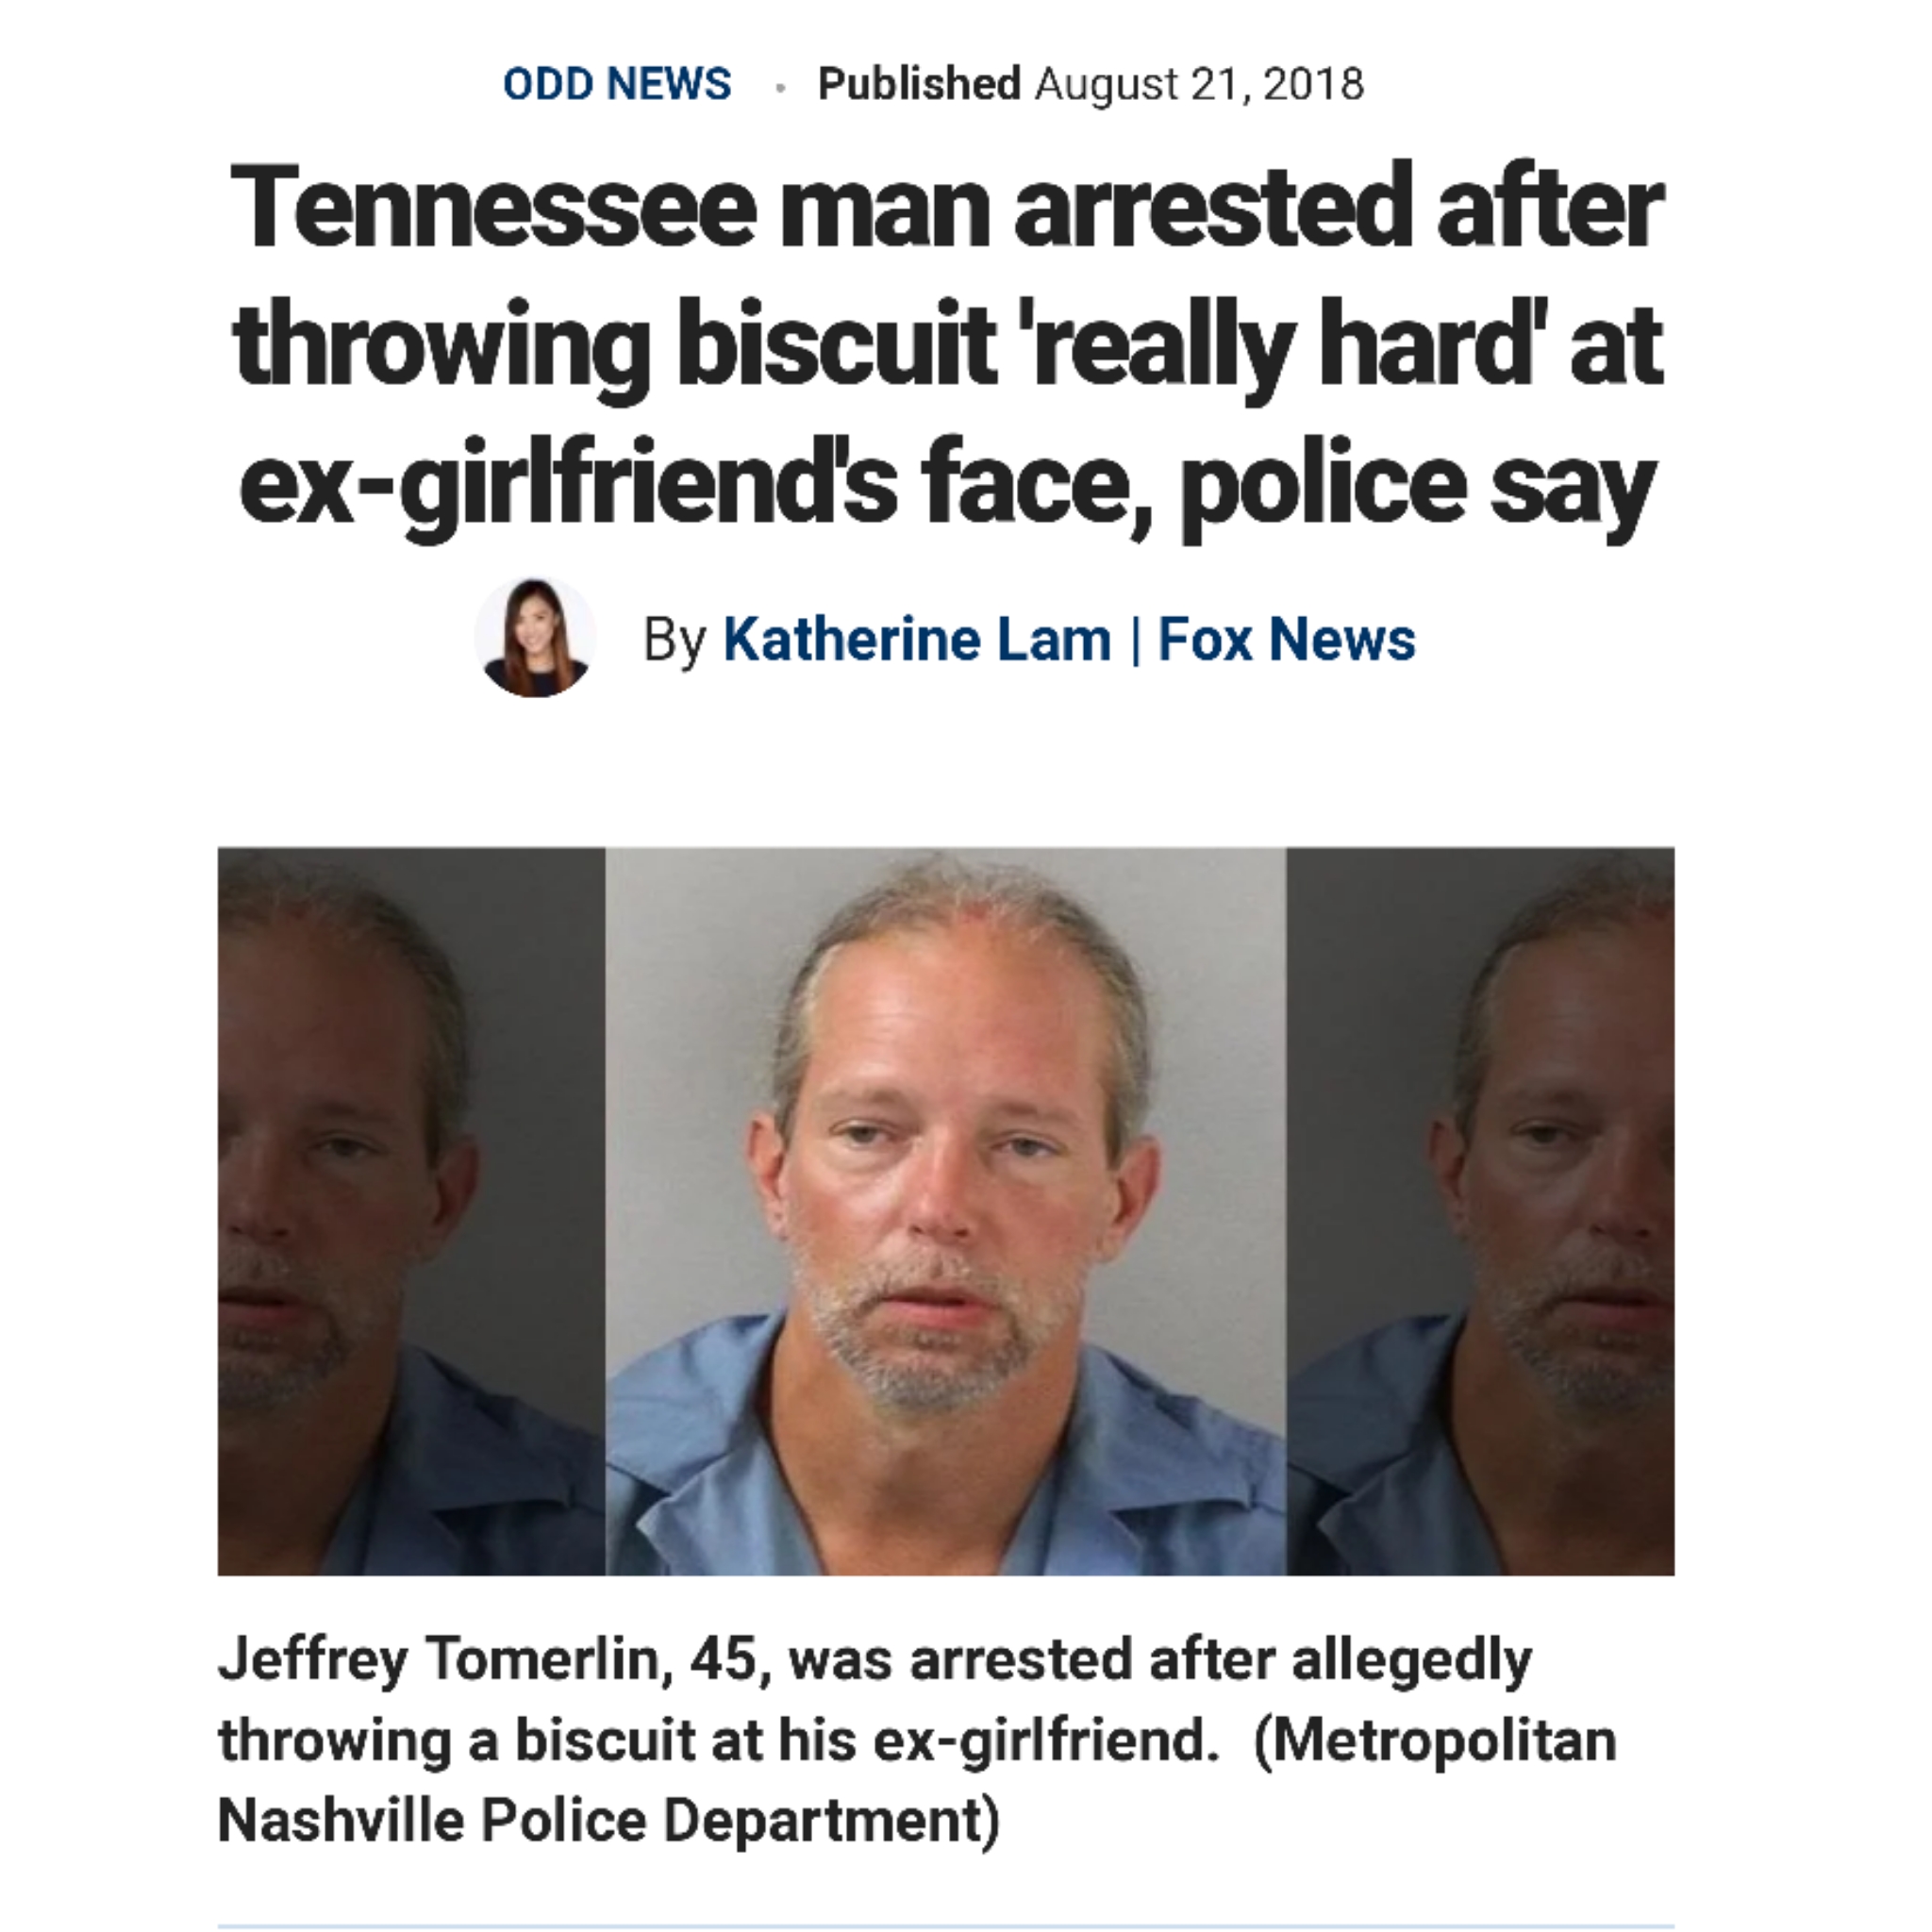 florida man august 21 news - Odd News Published Tennessee man arrested after throwing biscuit 'really hard' at exgirlfriend's face, police say By Katherine Lam | Fox News Jeffrey Tomerlin, 45, was arrested after allegedly throwing a biscuit at his exgirlf